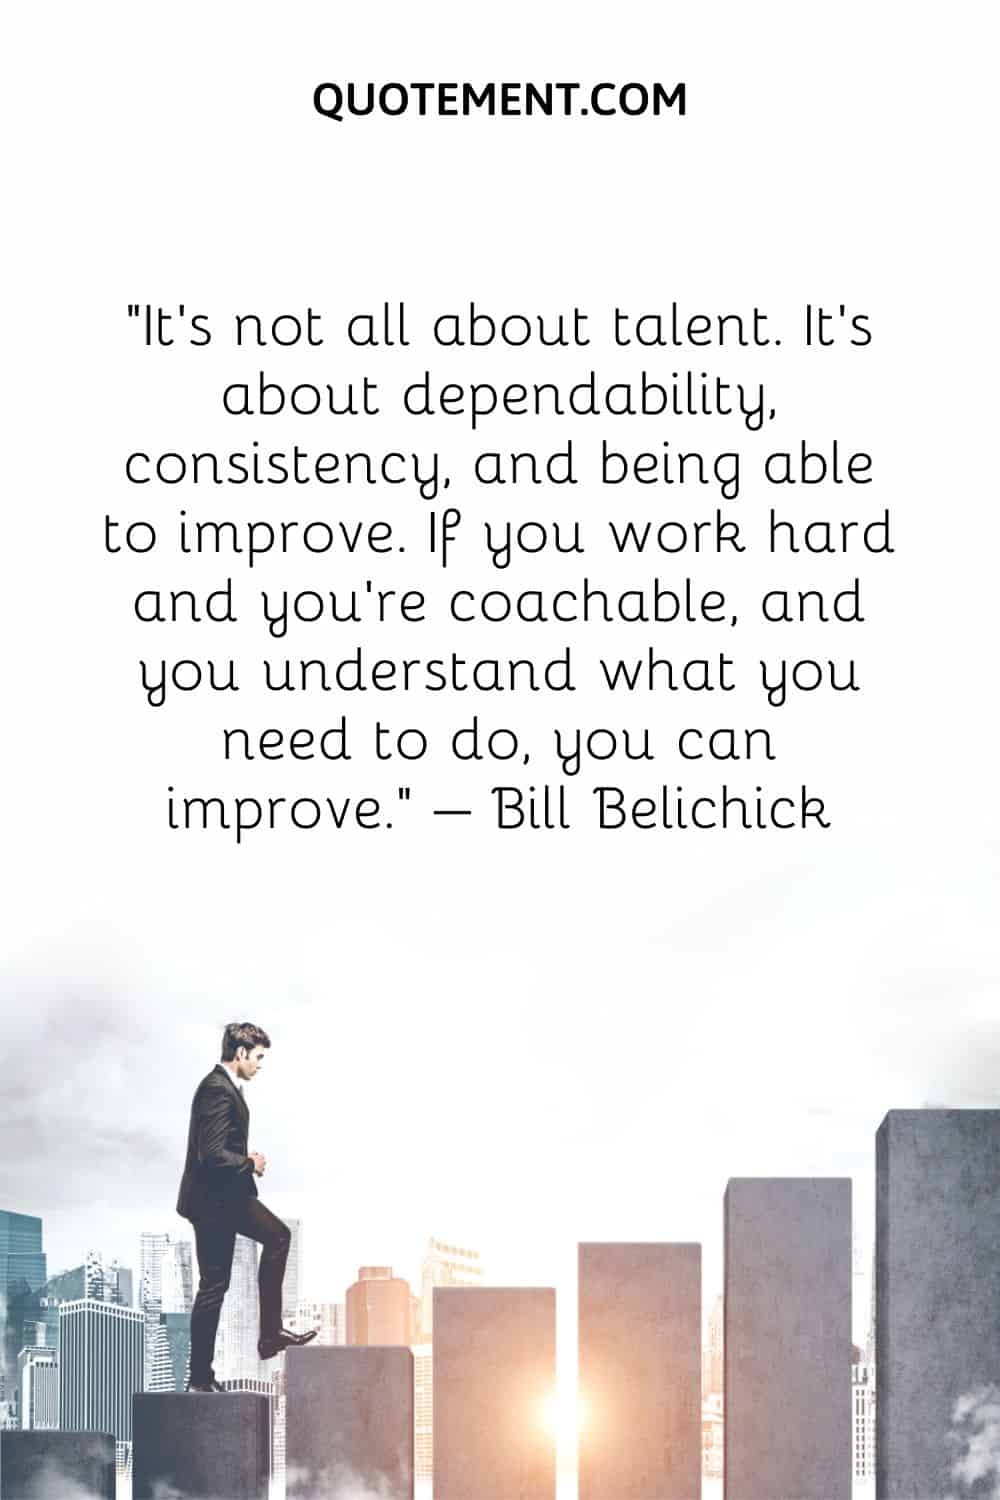 It's not all about talent. It's about dependability, consistency, and being able to improve